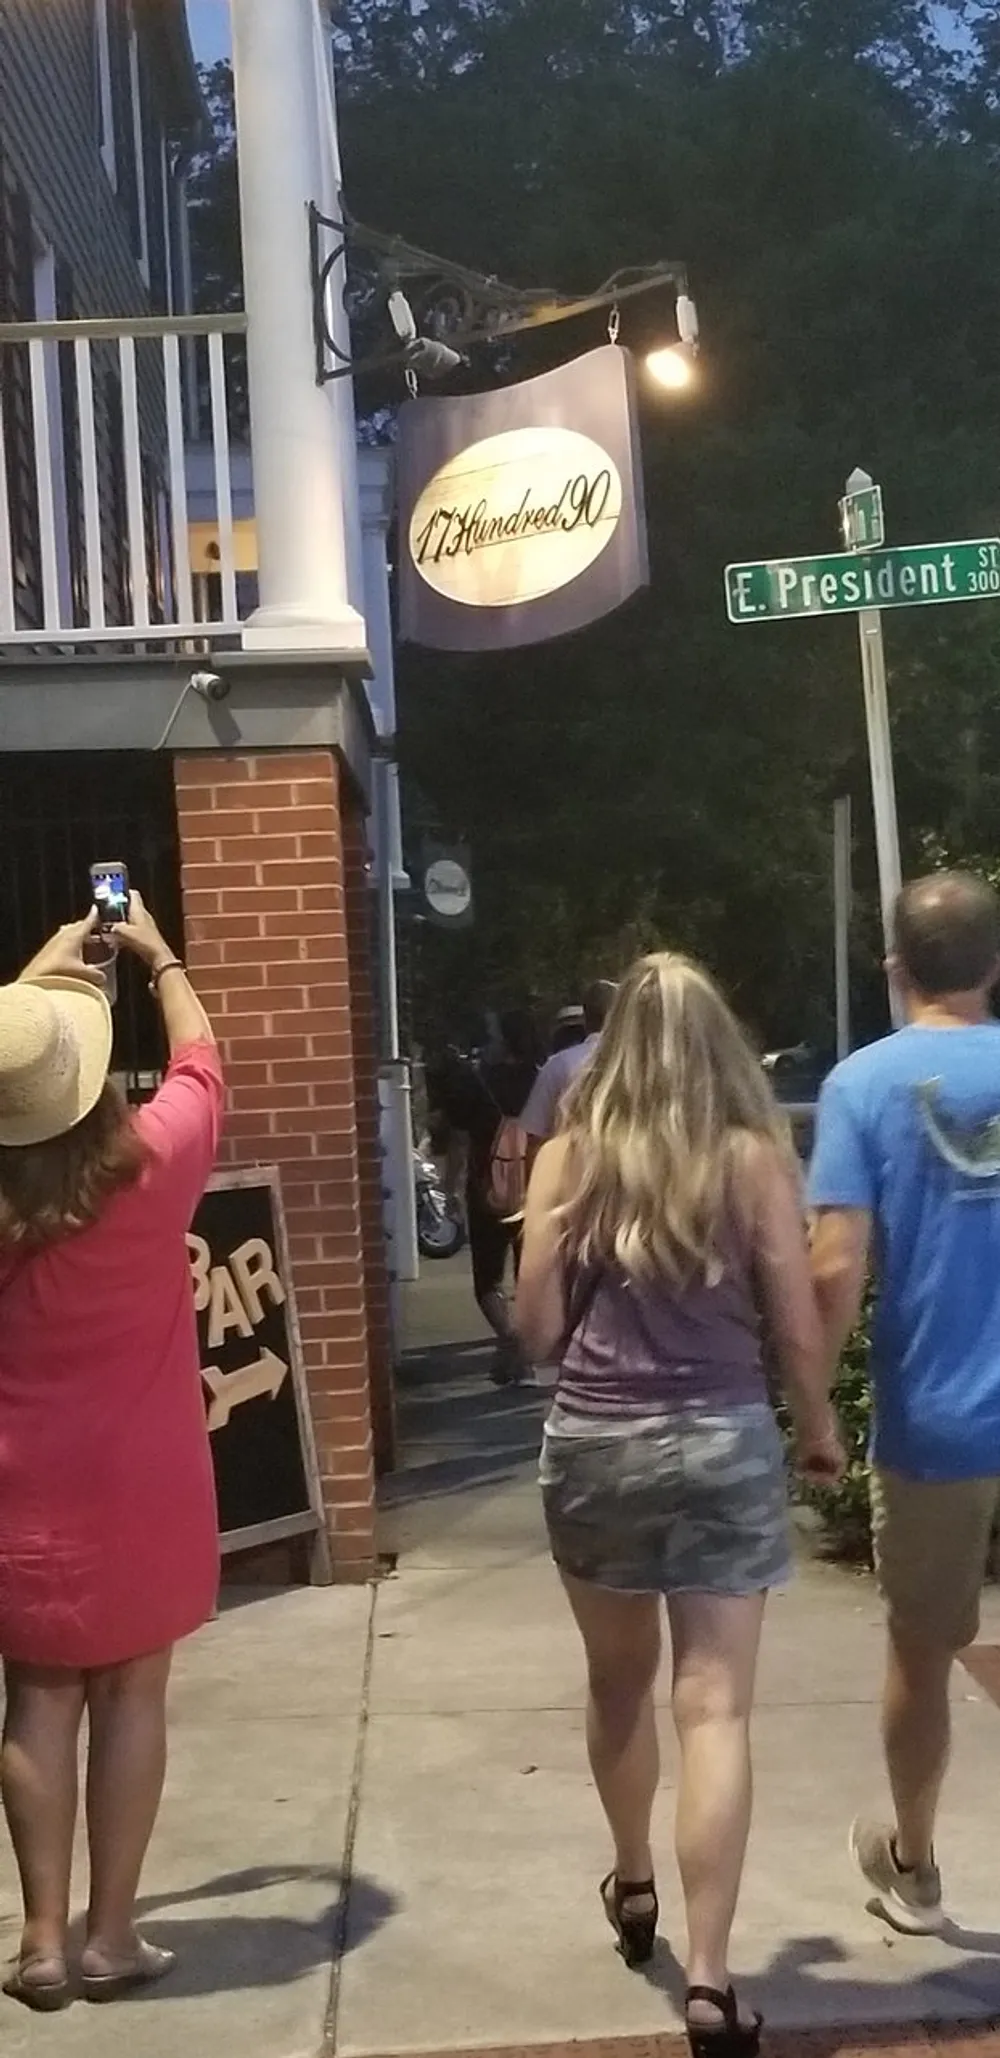 Pedestrians are walking on a sidewalk at dusk past a building with a sign that says 17Hundred90 and a woman is taking a photo with her smartphone